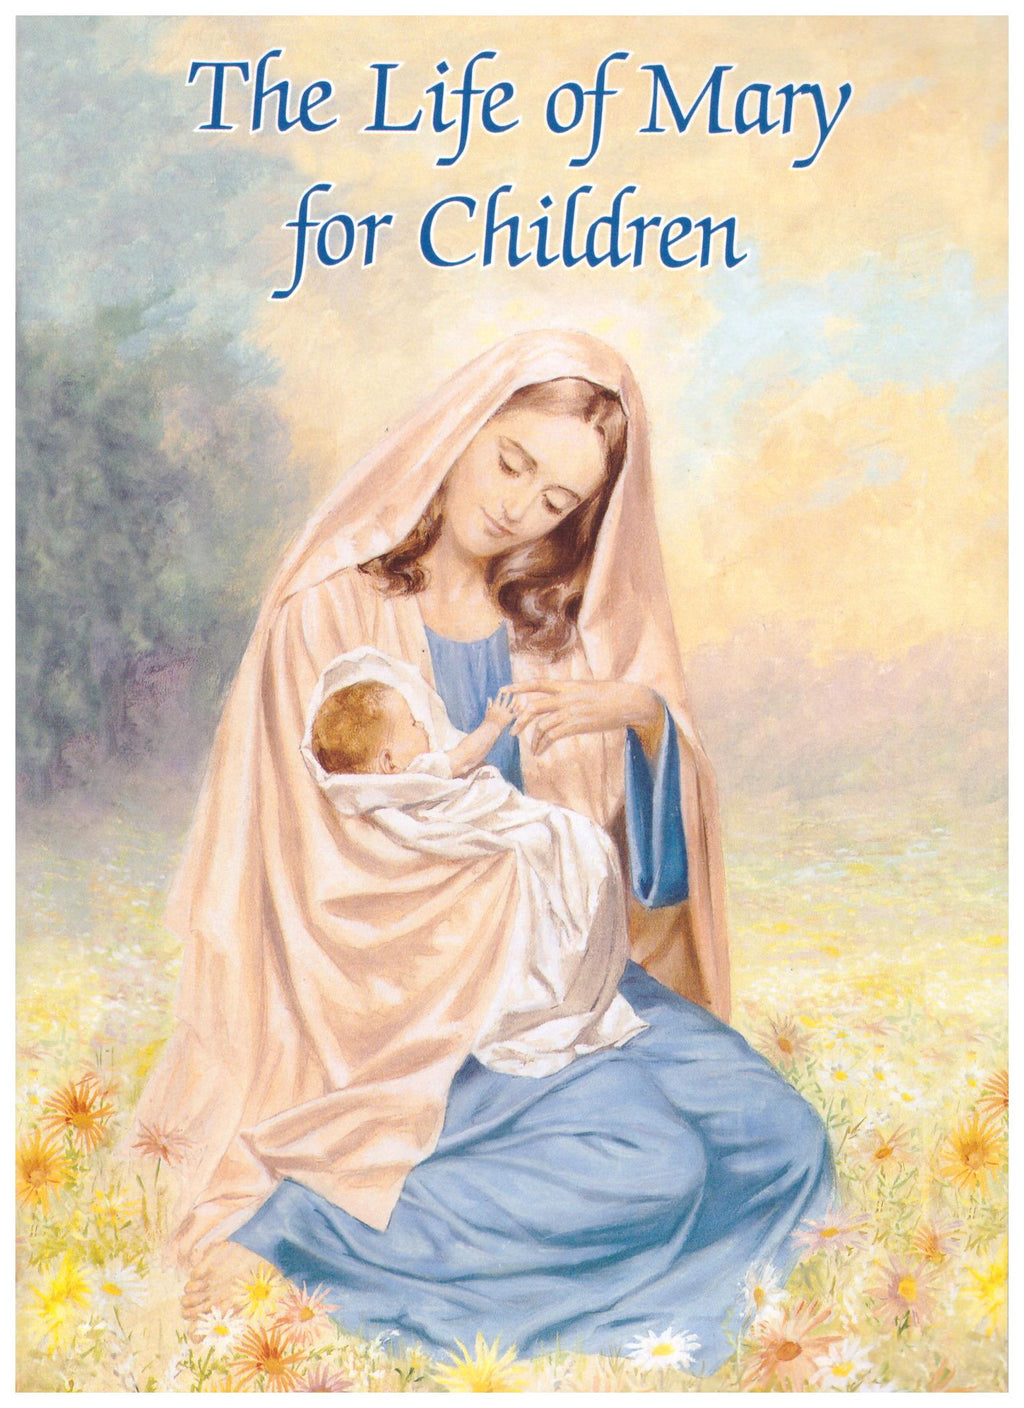 THE LIFE OF MARY FOR CHILDREN